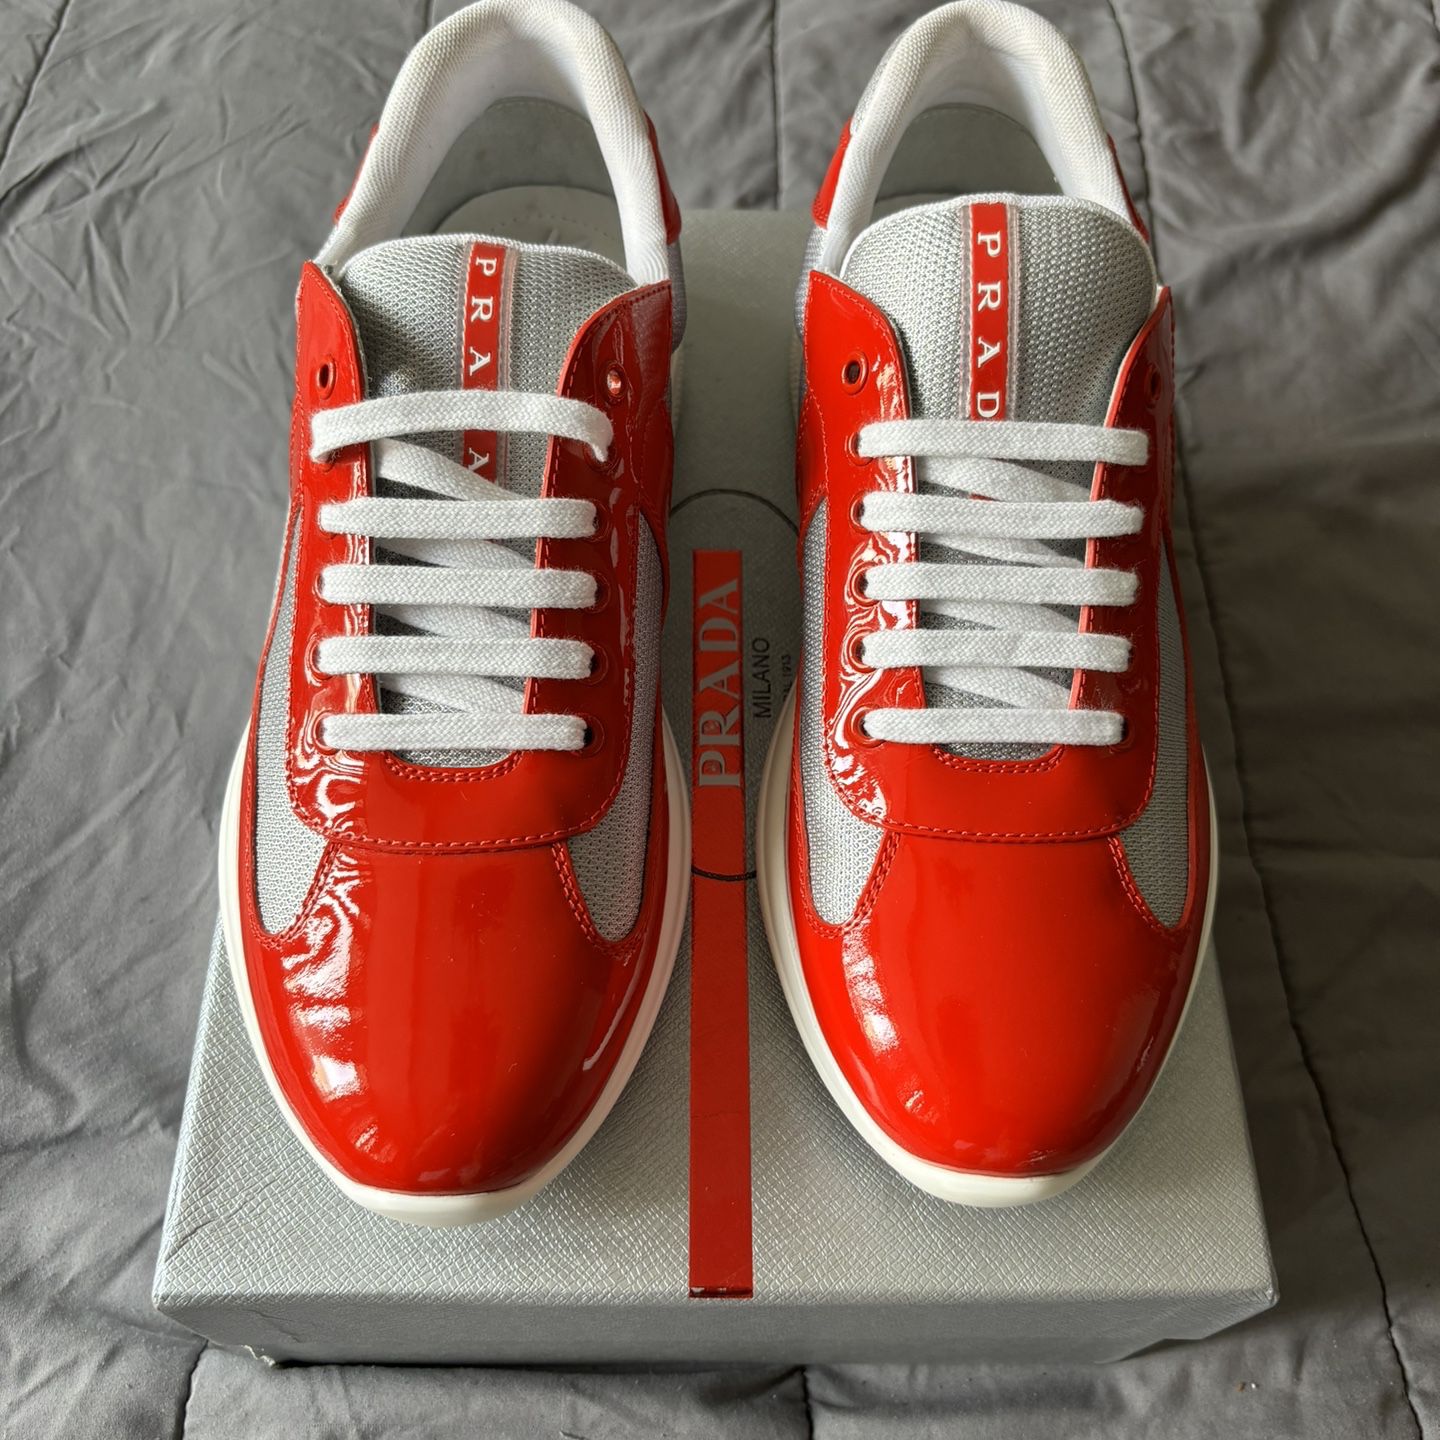 Prada Americas Cup Red Size 43 (Shipping Only, Come With Original Box)